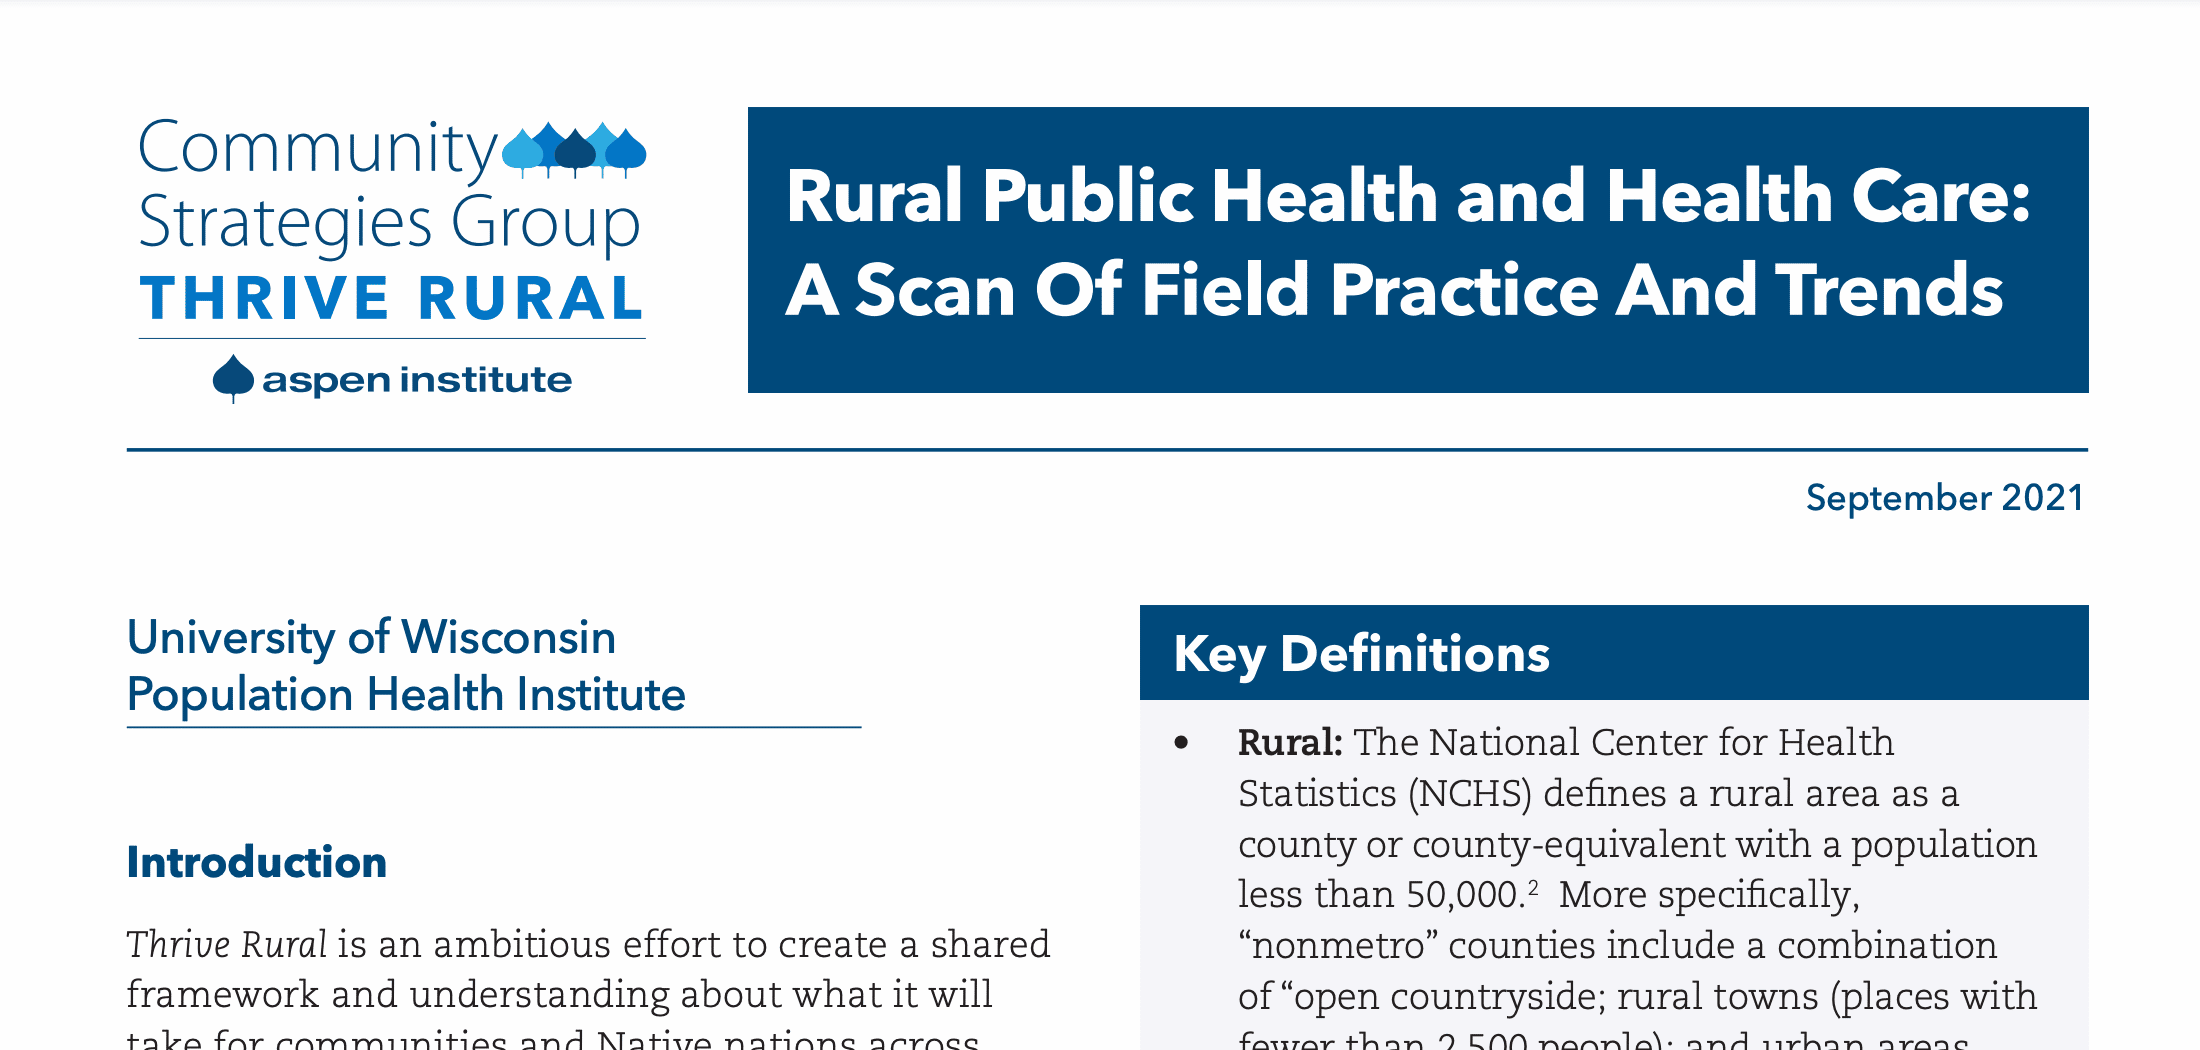 Community Strategies Group Thrive Rural, Rural Public Health and Health Care: A Scan of Field Practice and Trends, by University of Wisconsin Population Health Institute